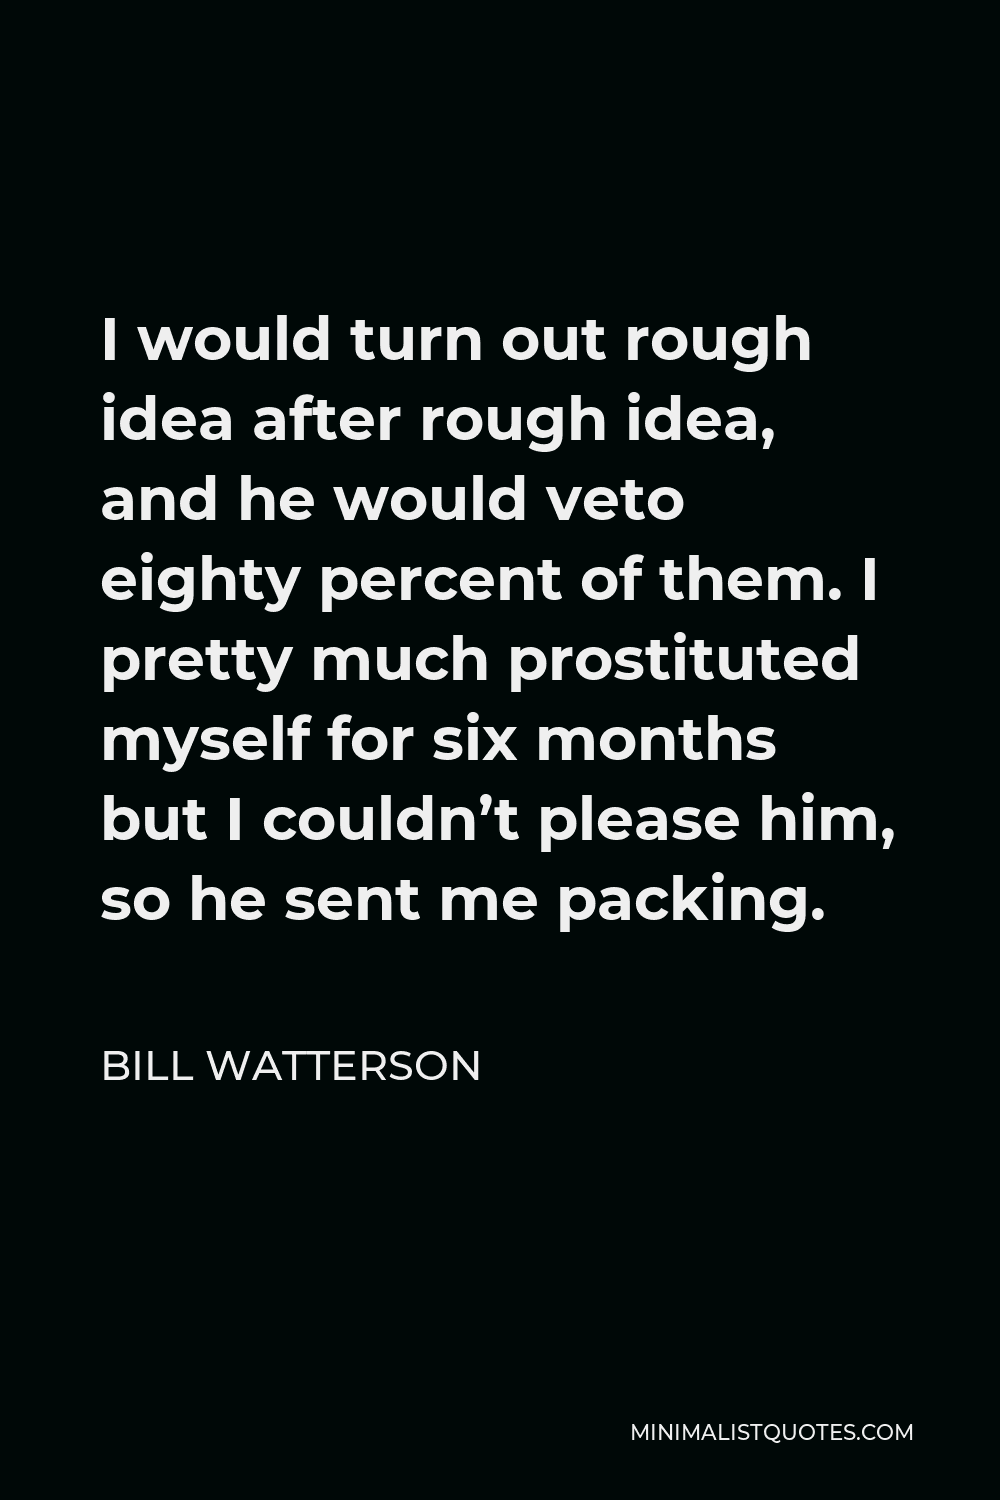 Bill Watterson Quote - I would turn out rough idea after rough idea, and he would veto eighty percent of them. I pretty much prostituted myself for six months but I couldn’t please him, so he sent me packing.